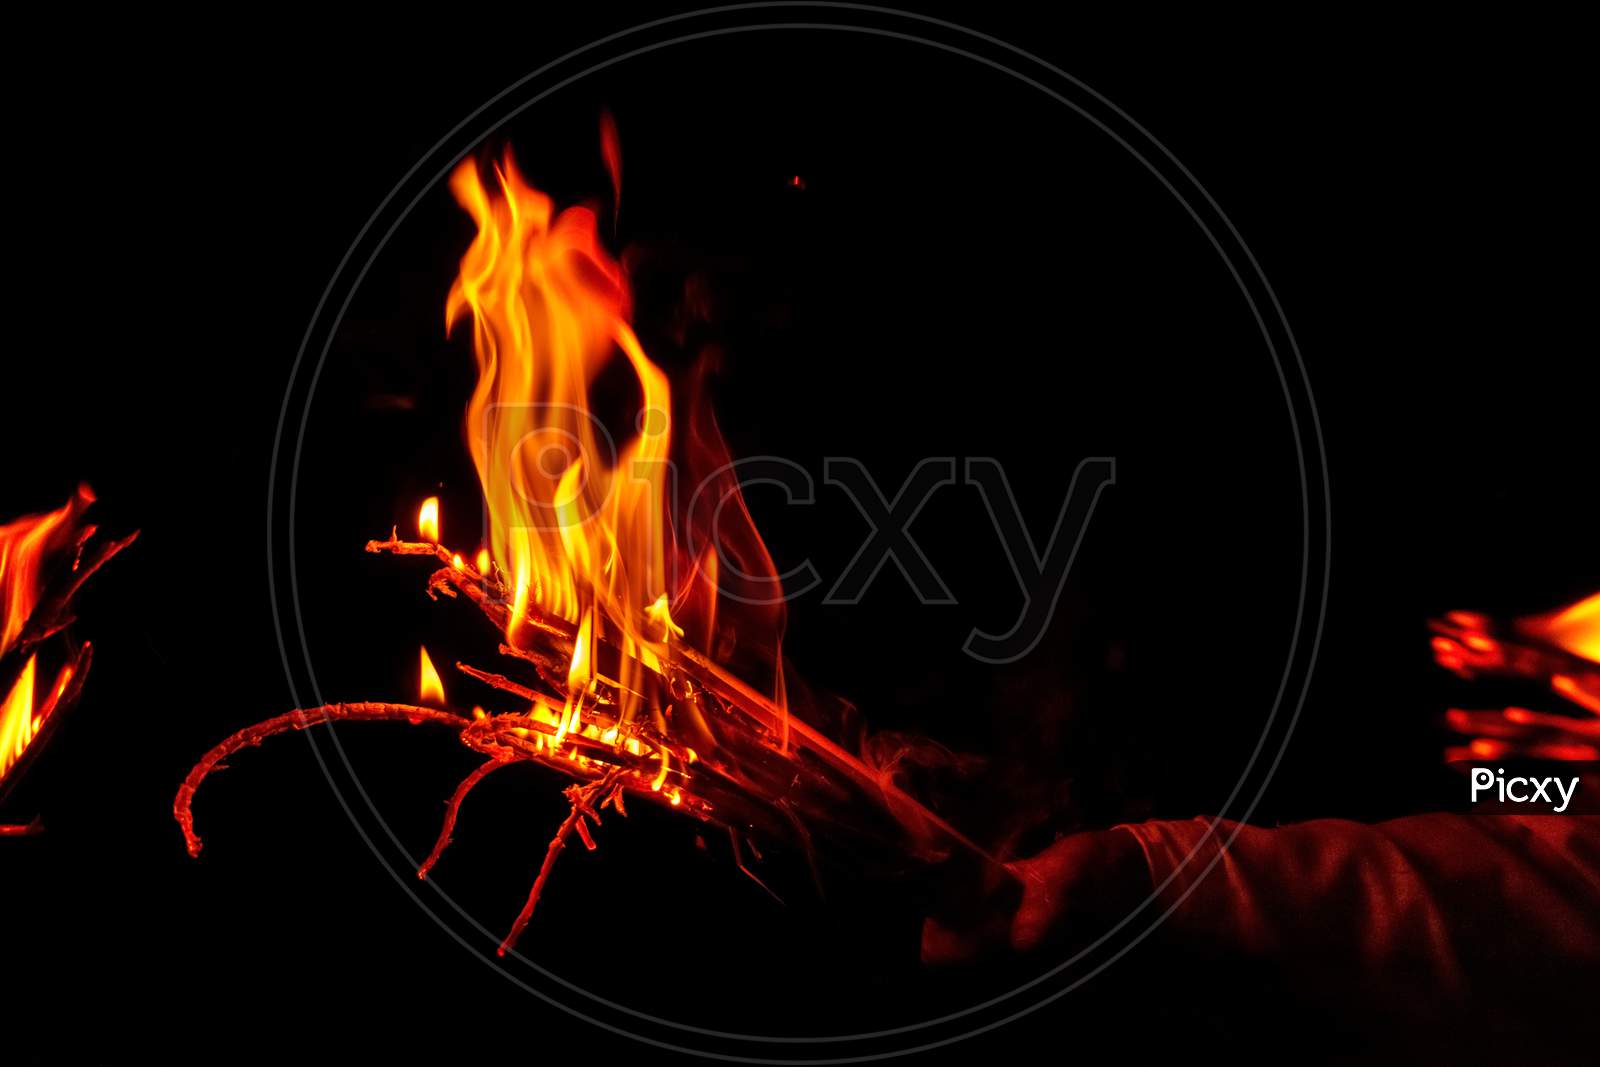 Picture of the human hand holding a flaming torch in the dark night